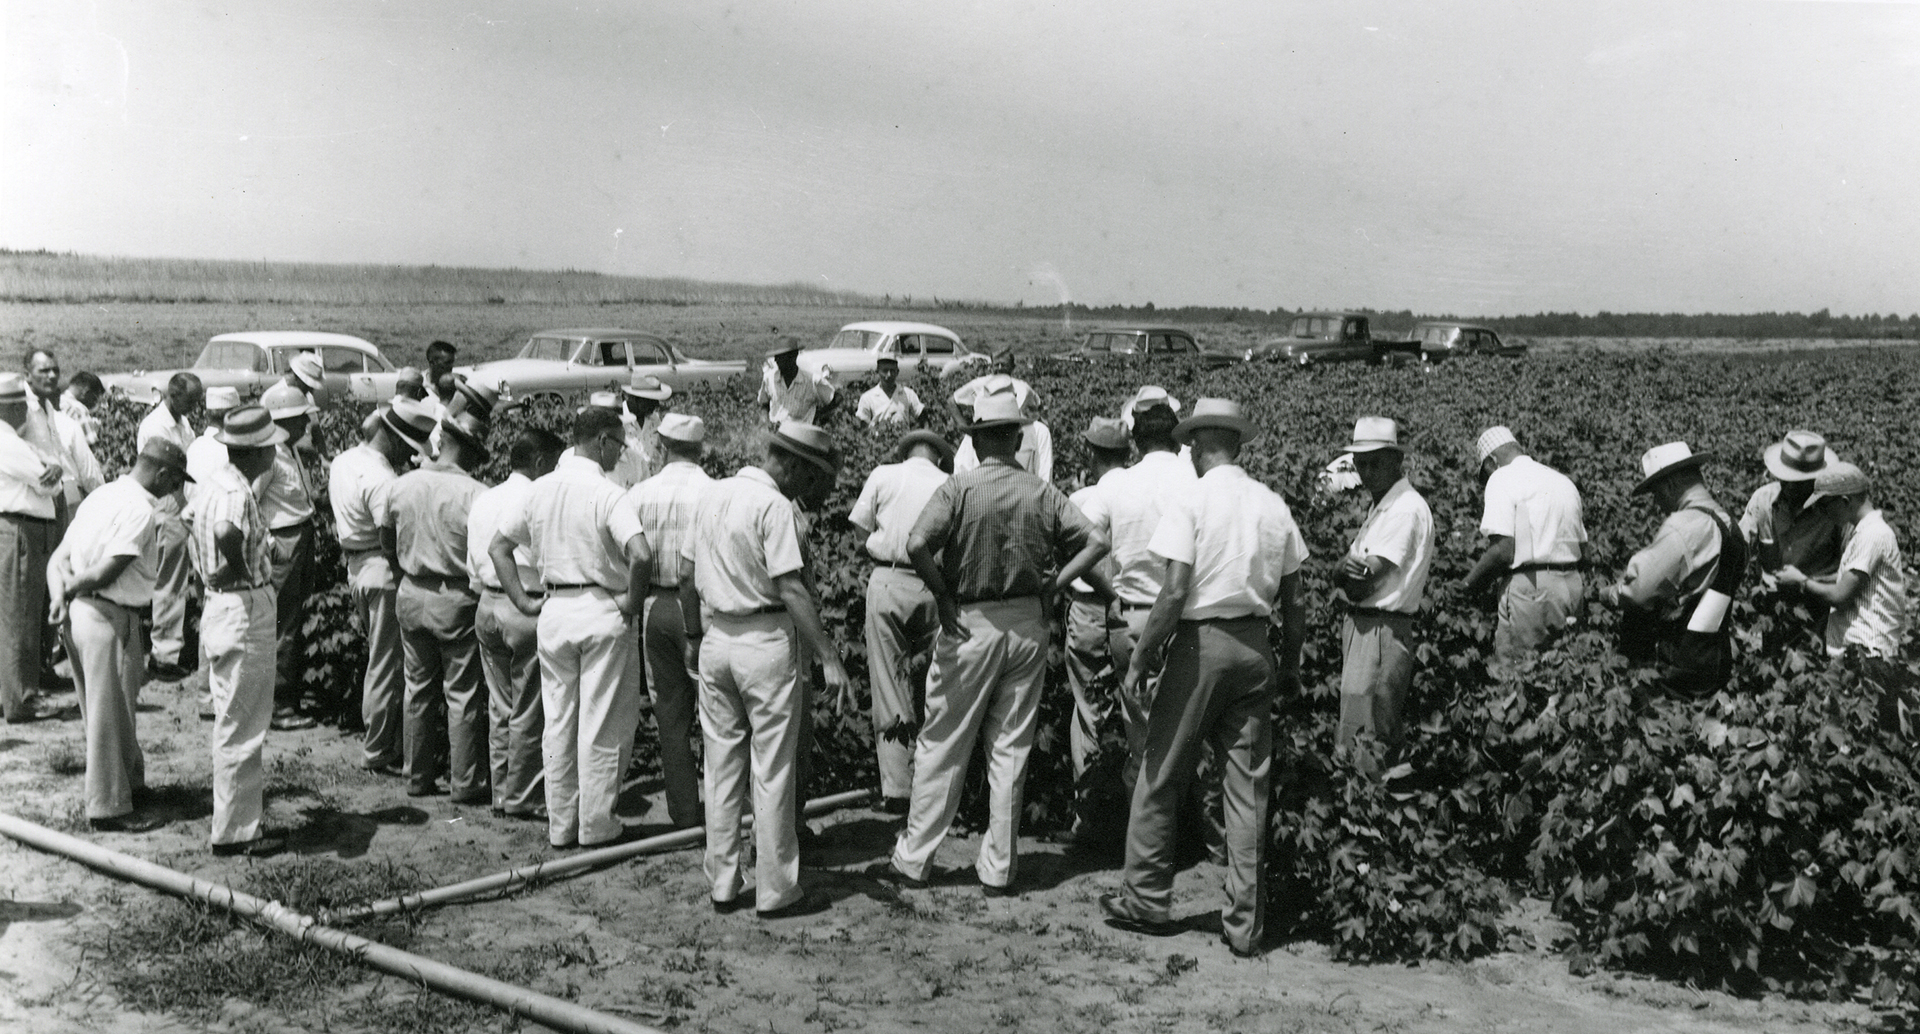 A group of people look at a field of cotton